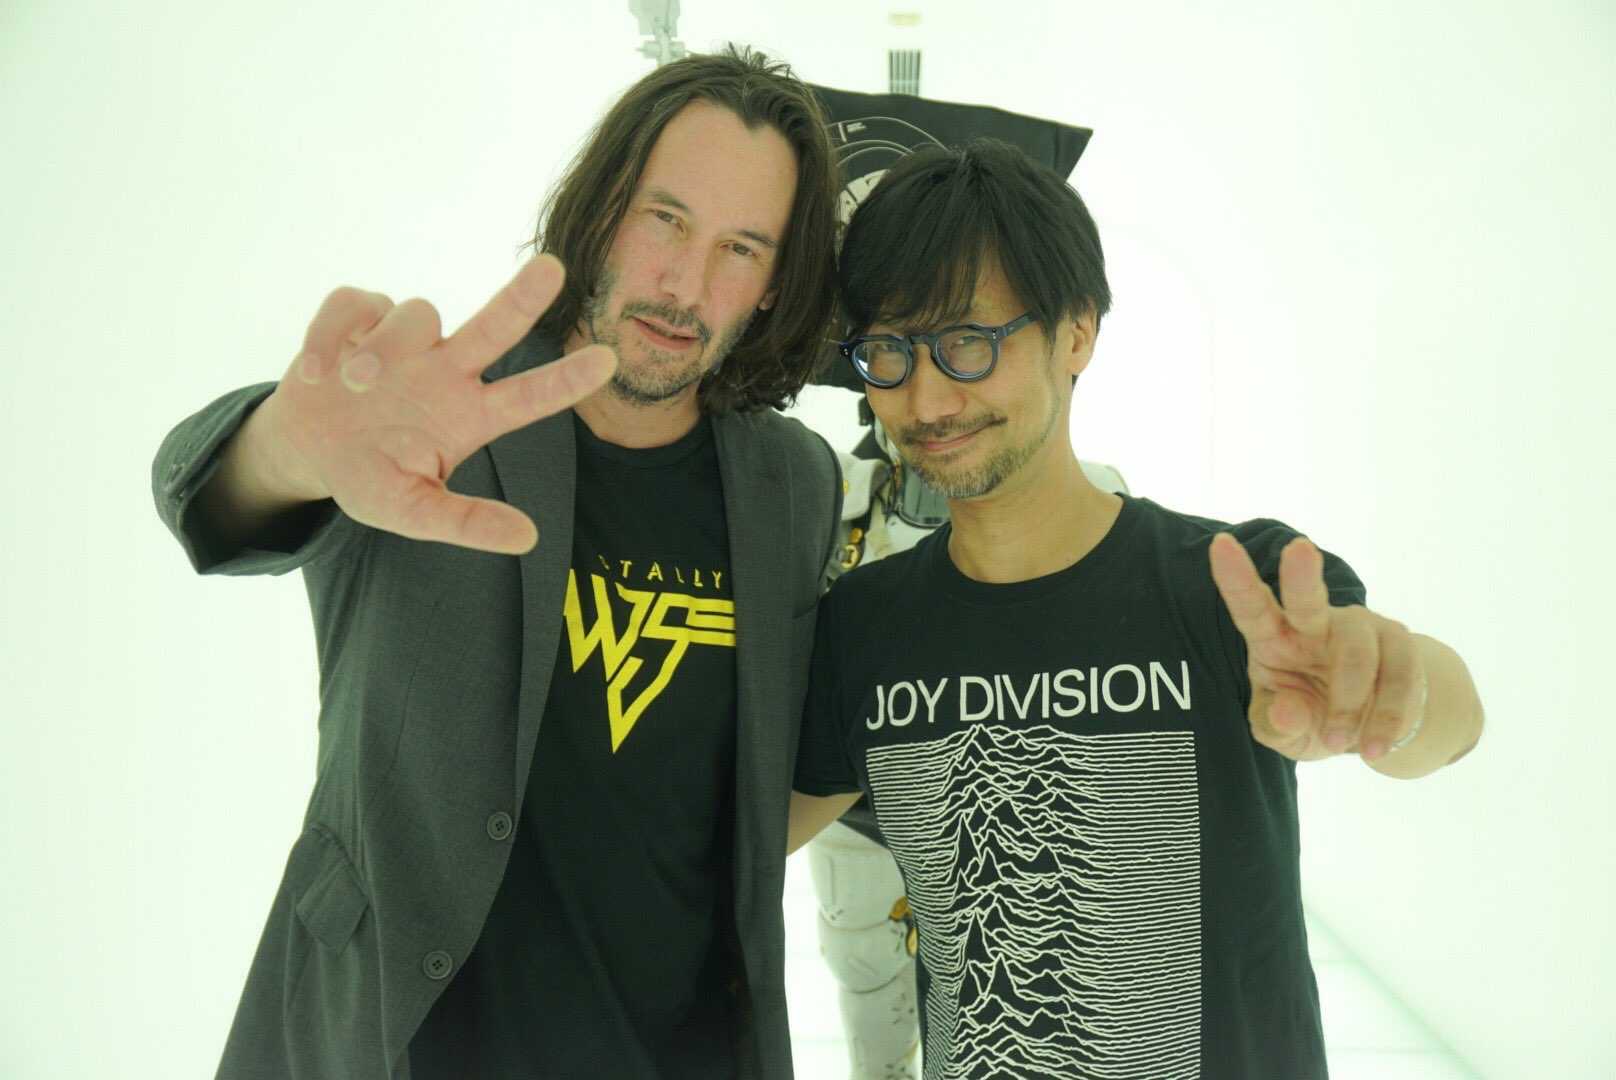 Keanu Reeves - Taily Joy Division